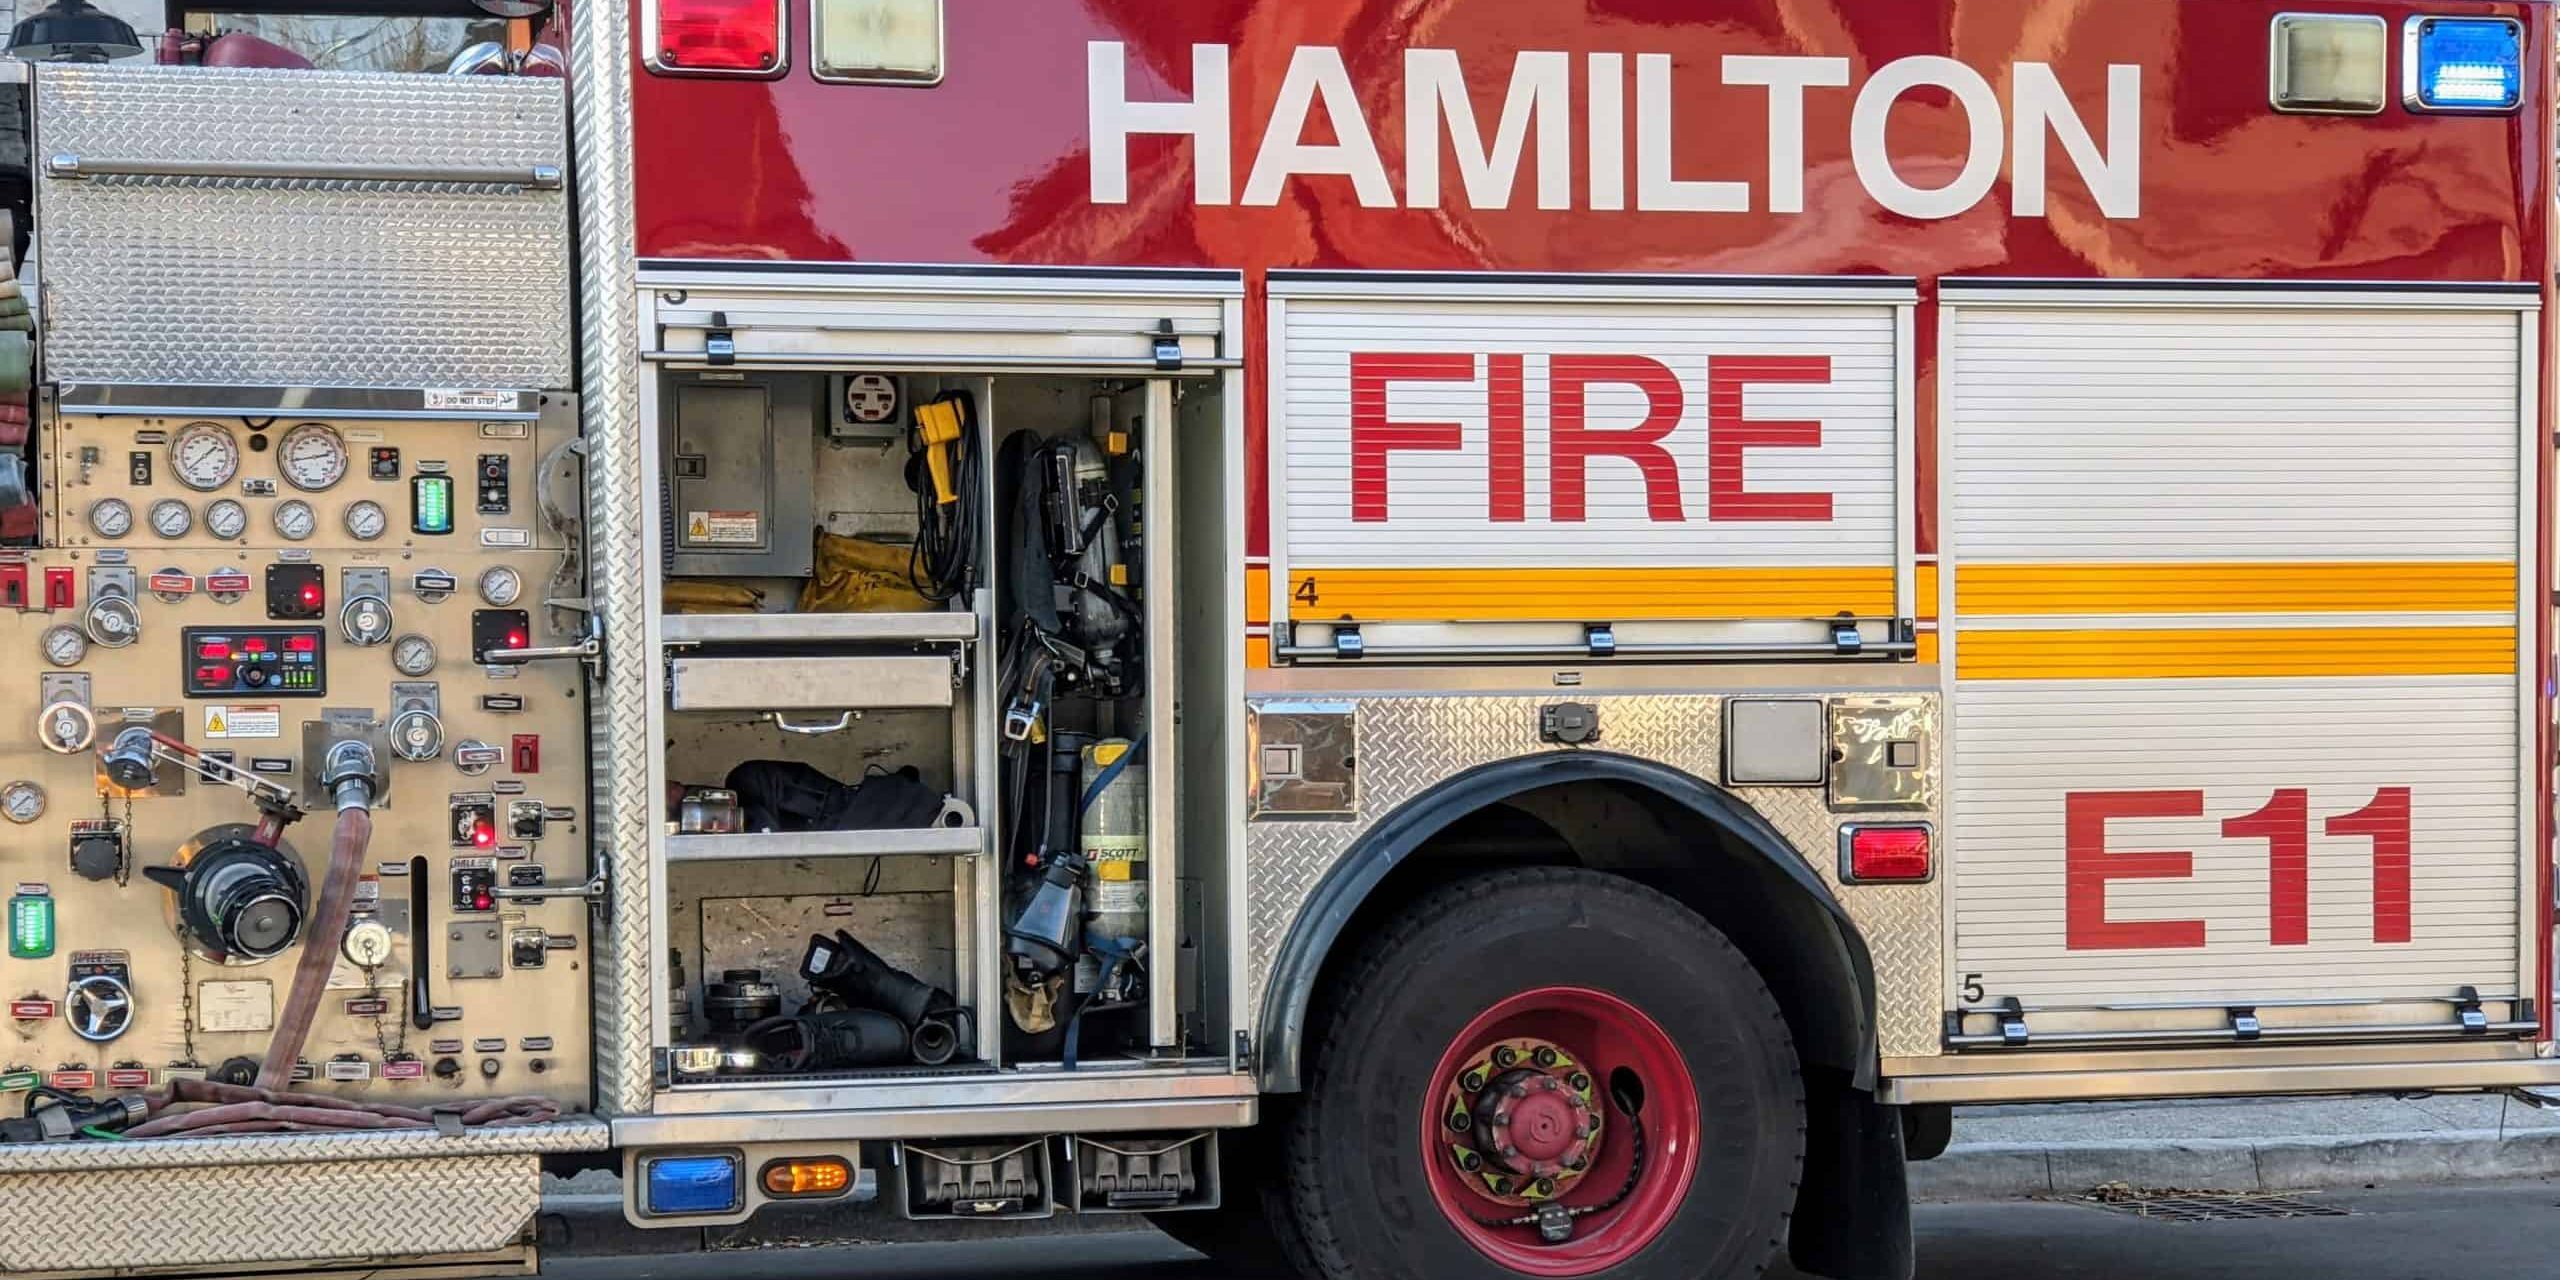 hamilton fire killed dead four people two adults two children derby rymal upper gage